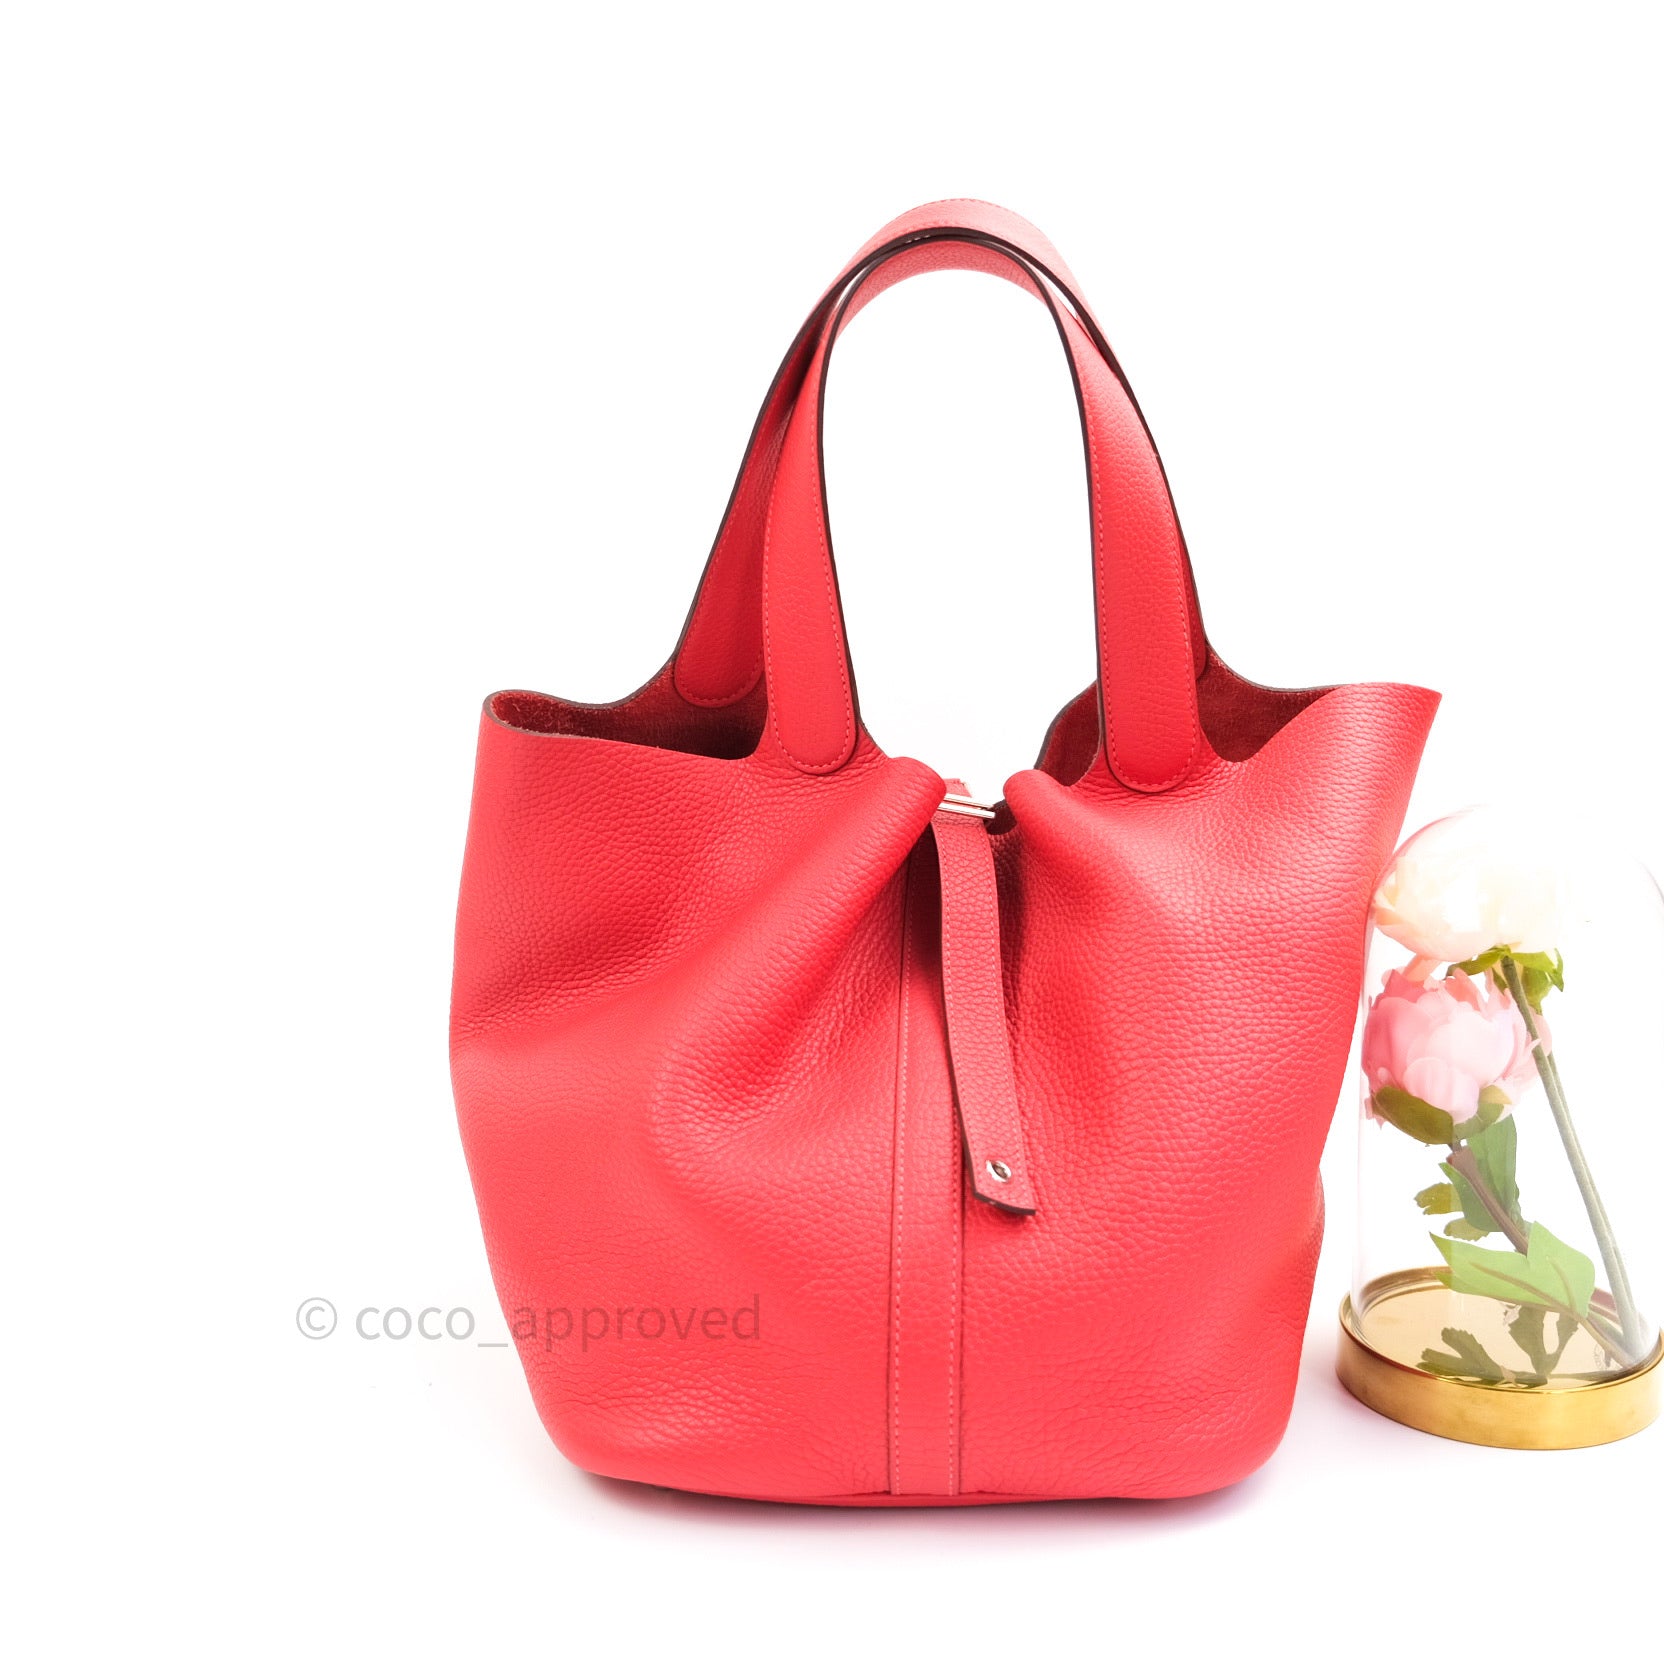 Hermès Red Taurillion Clemence Picotin